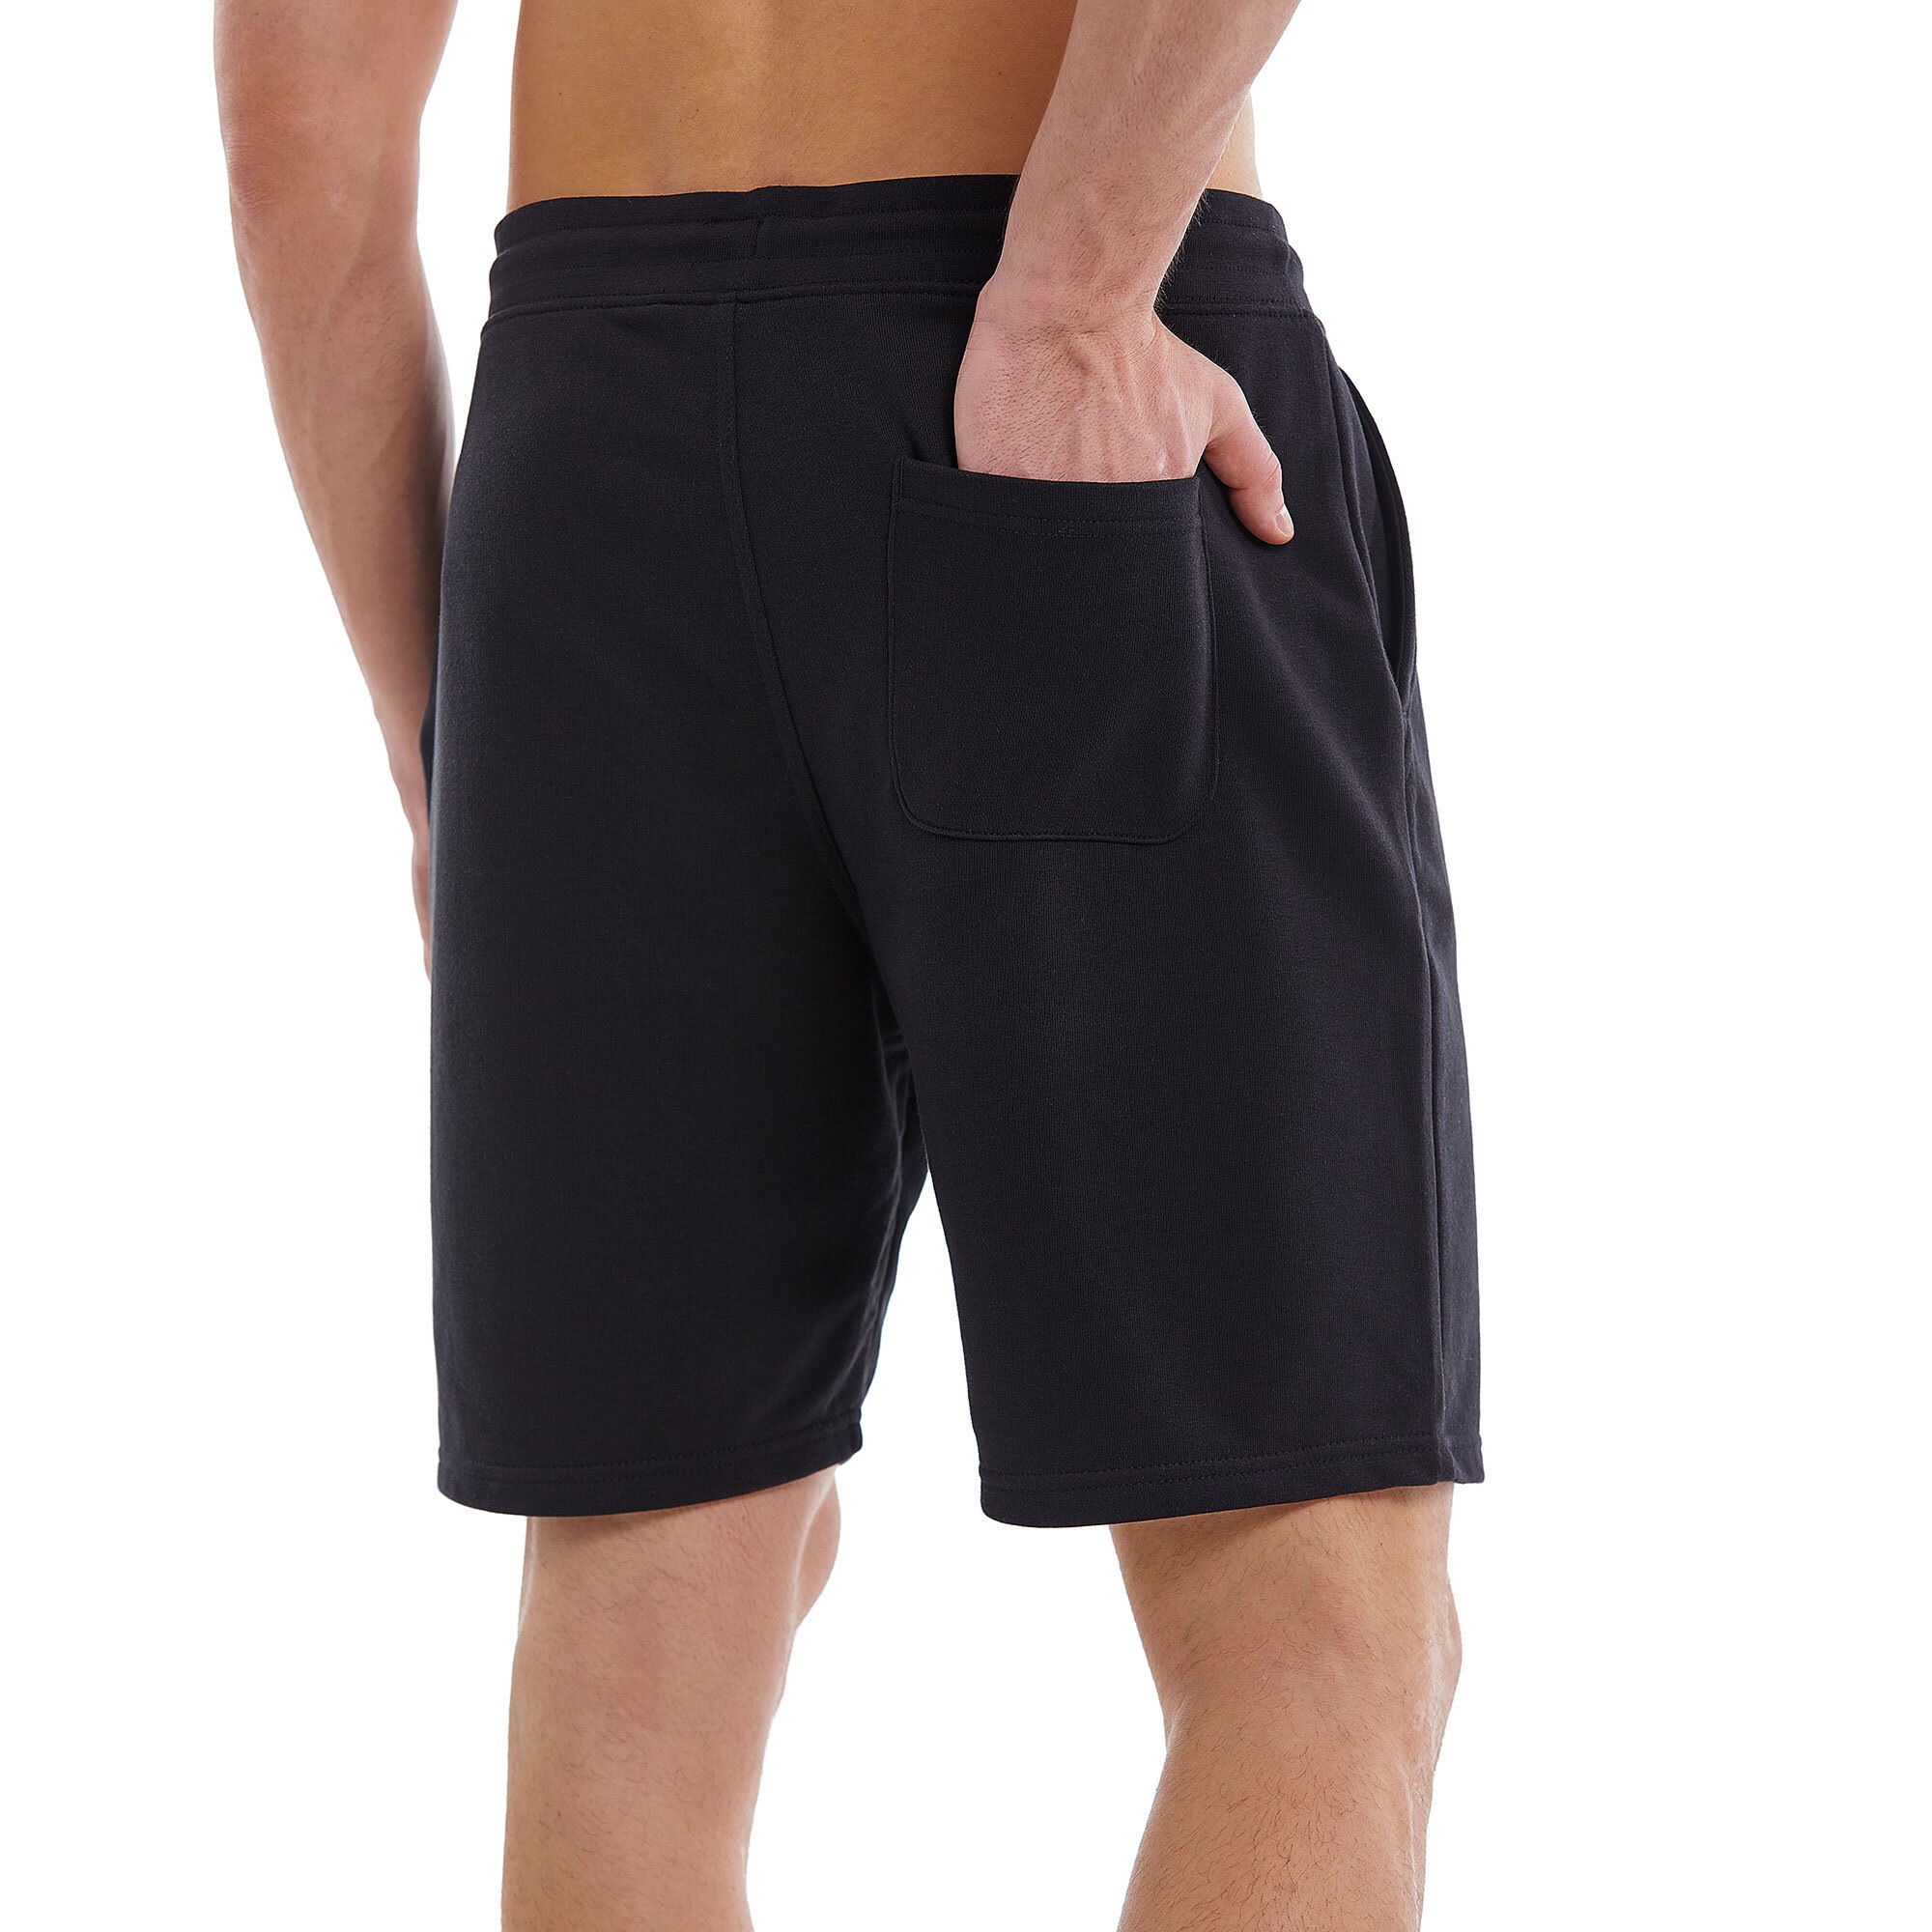 YEAZ Funktionsshorts »Shorts CHAX«